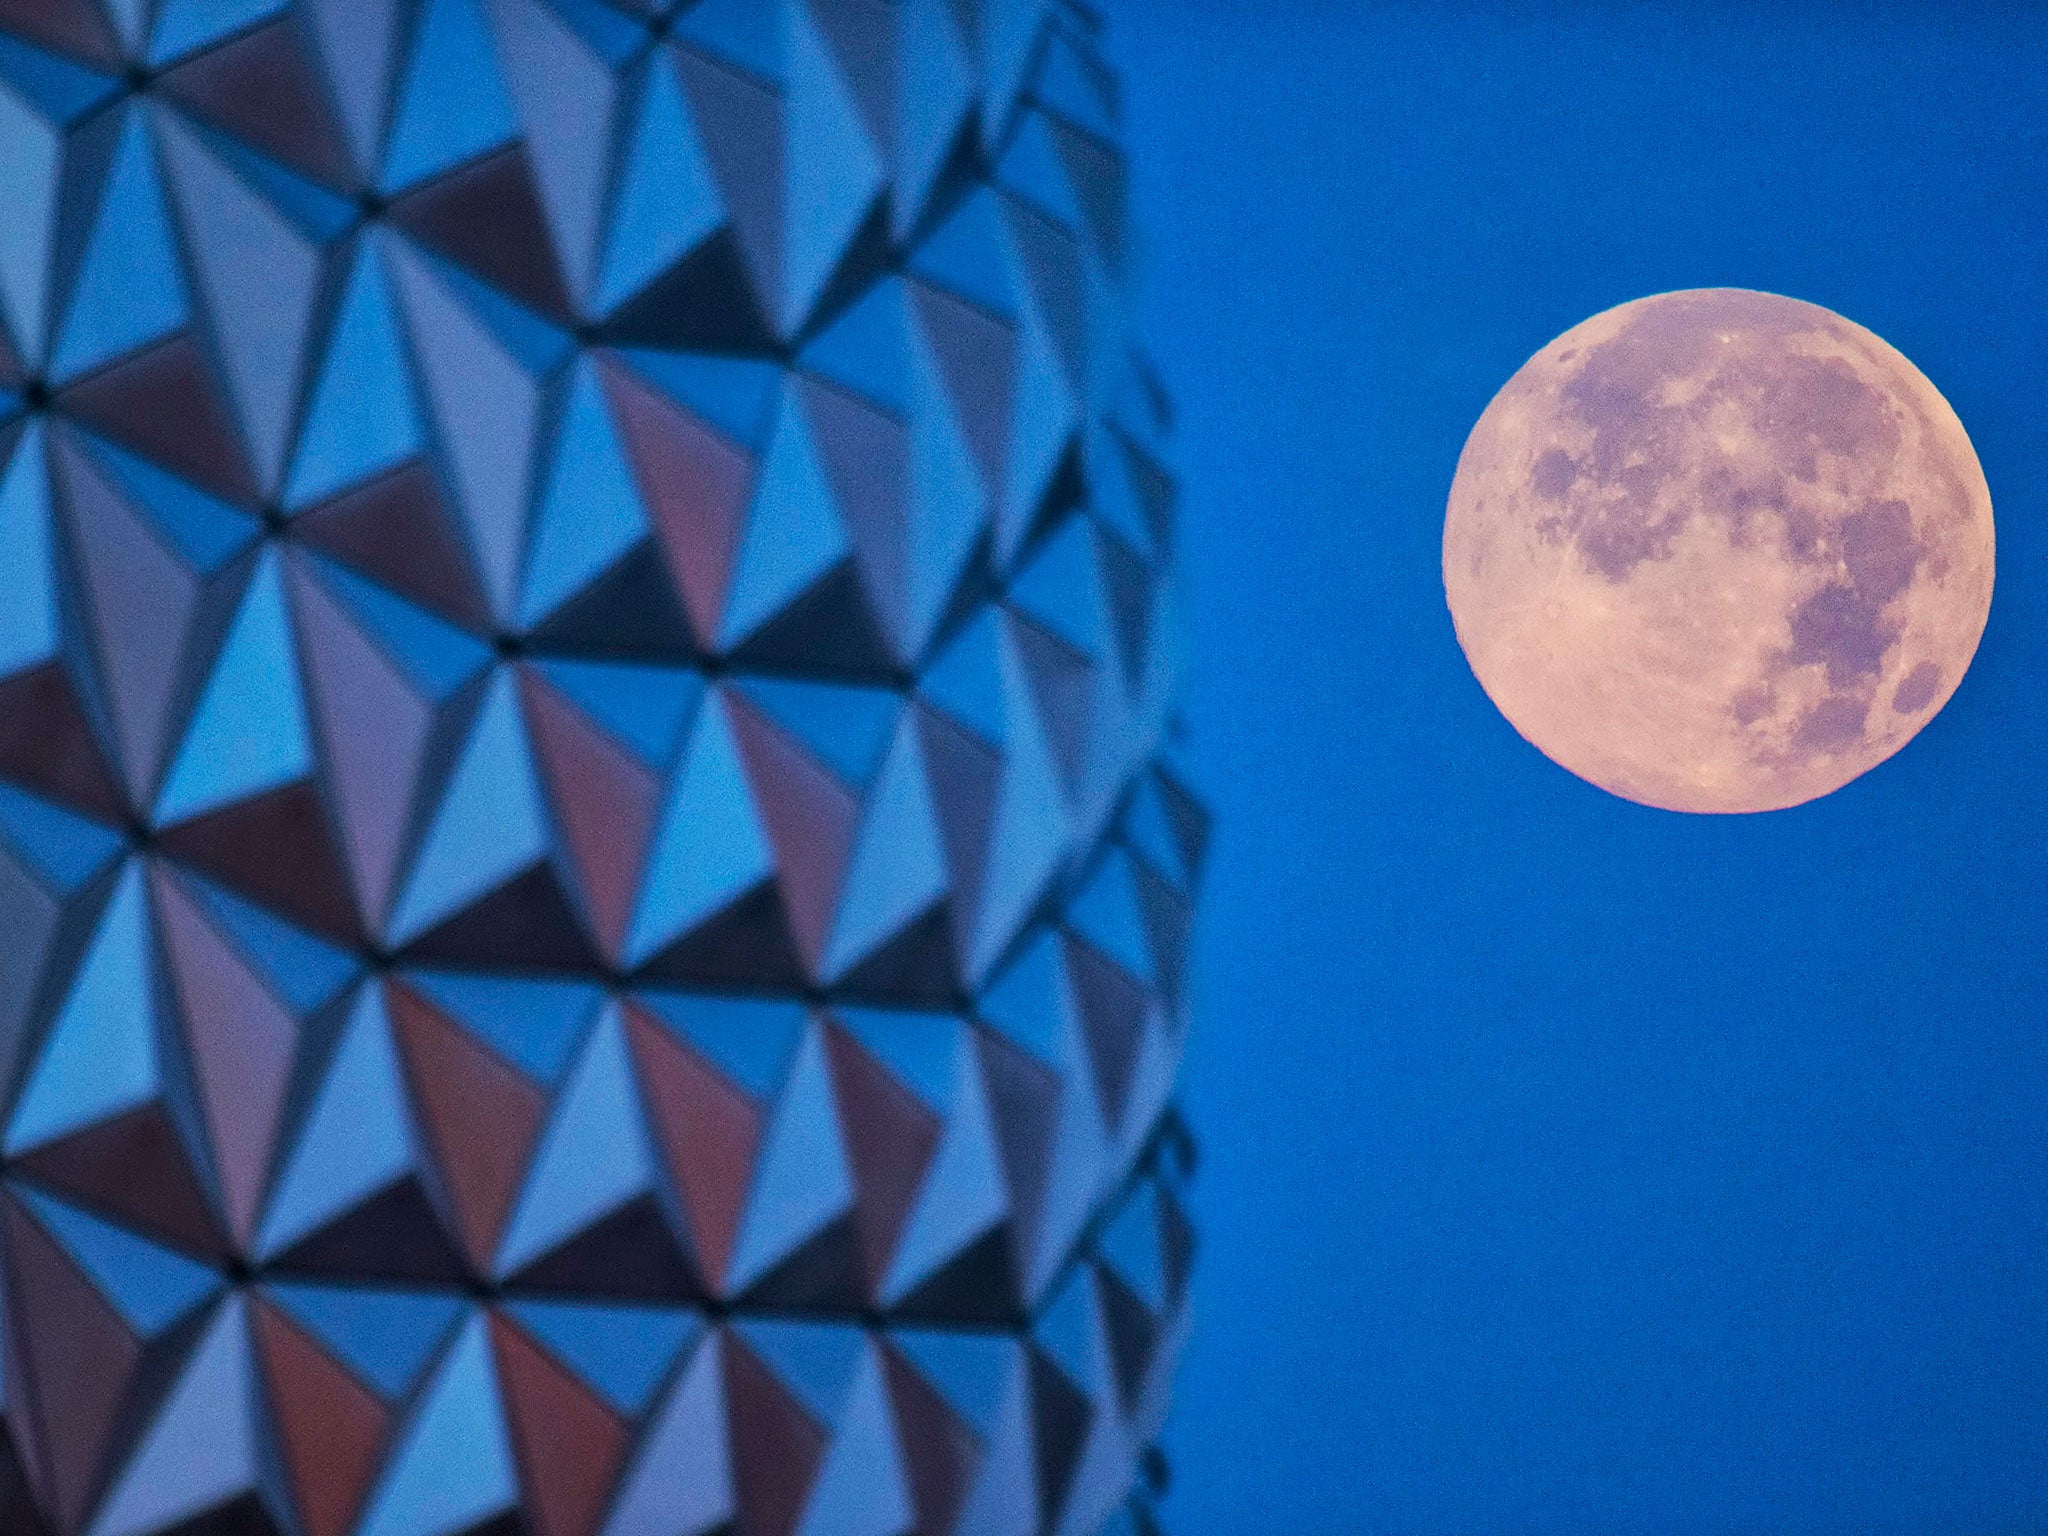 In this handout photo provided by Disney Parks, the 'supermoon' is seen with the Epcot center geodesic sphere in the foreground on June 23, 2013 at Walt Disney World Resort in Lake Buena Vista, Florida. This 'supermoon' is the closest and largest full moo